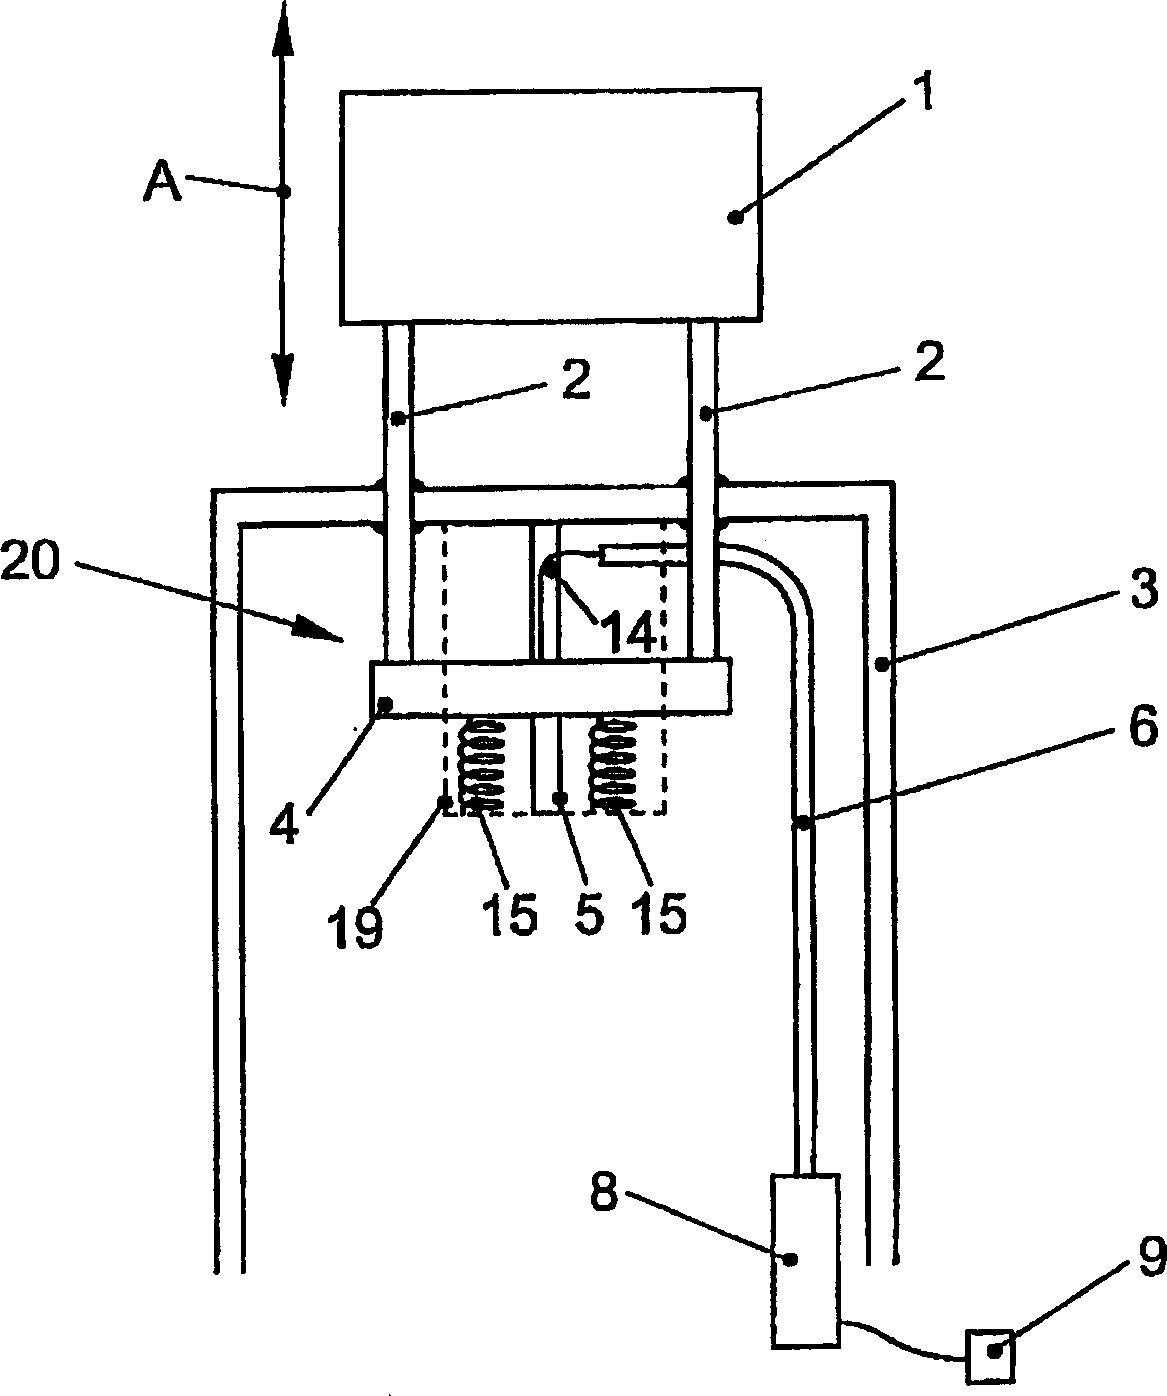 Adjuster device for height adjustment of a headrest